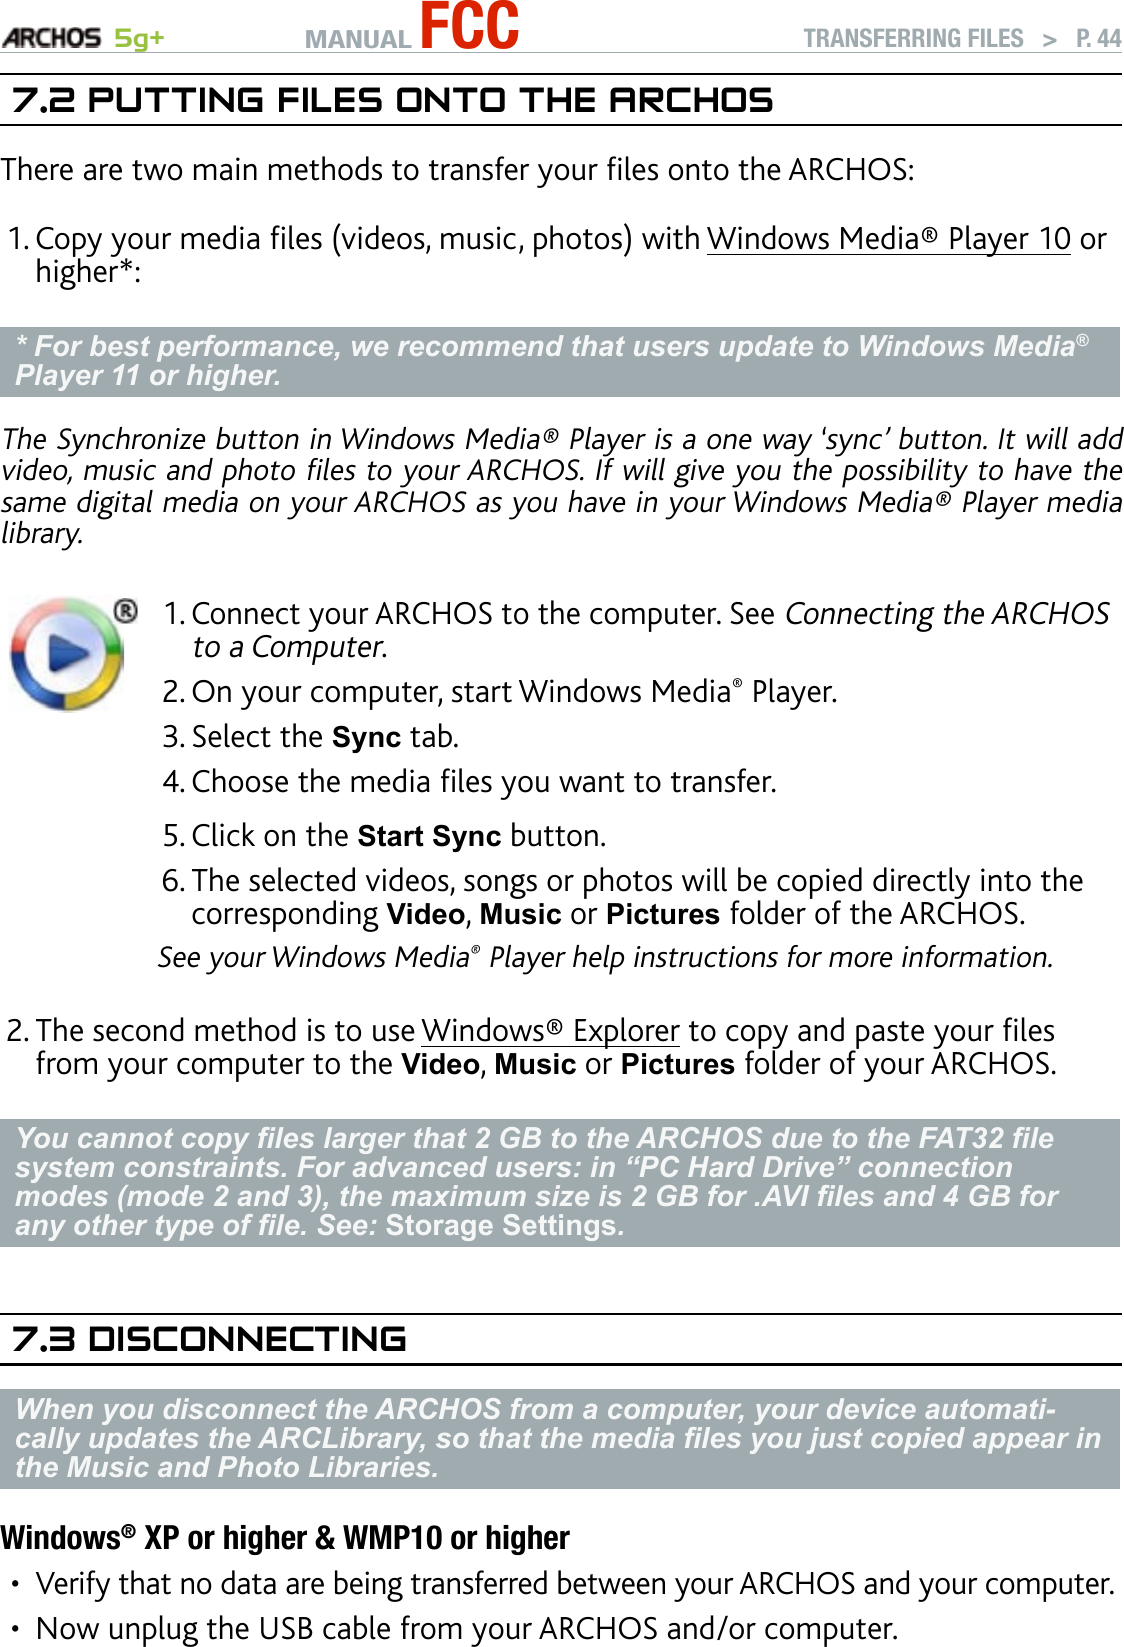 MANUAL FCC 5g+ TRANSFERRING FILES   &gt;   P. 447.2 PuTTIng fIles OnTO The arChOsThere are two main methods to transfer your les onto the ARCHOS:Copy your media les (videos, music, photos) with Windows Media® Player 10 or higher*:* For best performance, we recommend that users update to Windows Media® Player 11 or higher.The Synchronize button in Windows Media® Player is a one way ‘sync’ button. It will add video, music and photo les to your ARCHOS. If will give you the possibility to have the same digital media on your ARCHOS as you have in your Windows Media® Player media library. Connect your ARCHOS to the computer. See Connecting the ARCHOS to a Computer.On your computer, start Windows Media® Player. Select the Sync tab.Choose the media les you want to transfer. Click on the Start Sync button.The selected videos, songs or photos will be copied directly into the corresponding Video, Music or Pictures folder of the ARCHOS. See your Windows Media® Player help instructions for more information.1.2.3.4.5.6.The second method is to use Windows® Explorer to copy and paste your les from your computer to the Video, Music or Pictures folder of your ARCHOS.You cannot copy les larger that 2 GB to the ARCHOS due to the FAT32 le system constraints. For advanced users: in “PC Hard Drive” connection modes (mode 2 and 3), the maximum size is 2 GB for .AVI les and 4 GB for any other type of le. See: Storage Settings.7.3 dIsCOnneCTIngWhen you disconnect the ARCHOS from a computer, your device automati-cally updates the ARCLibrary, so that the media les you just copied appear in the Music and Photo Libraries.Windows® XP or higher &amp; WMP10 or higherVerify that no data are being transferred between your ARCHOS and your computer.Now unplug the USB cable from your ARCHOS and/or computer.1.2.••